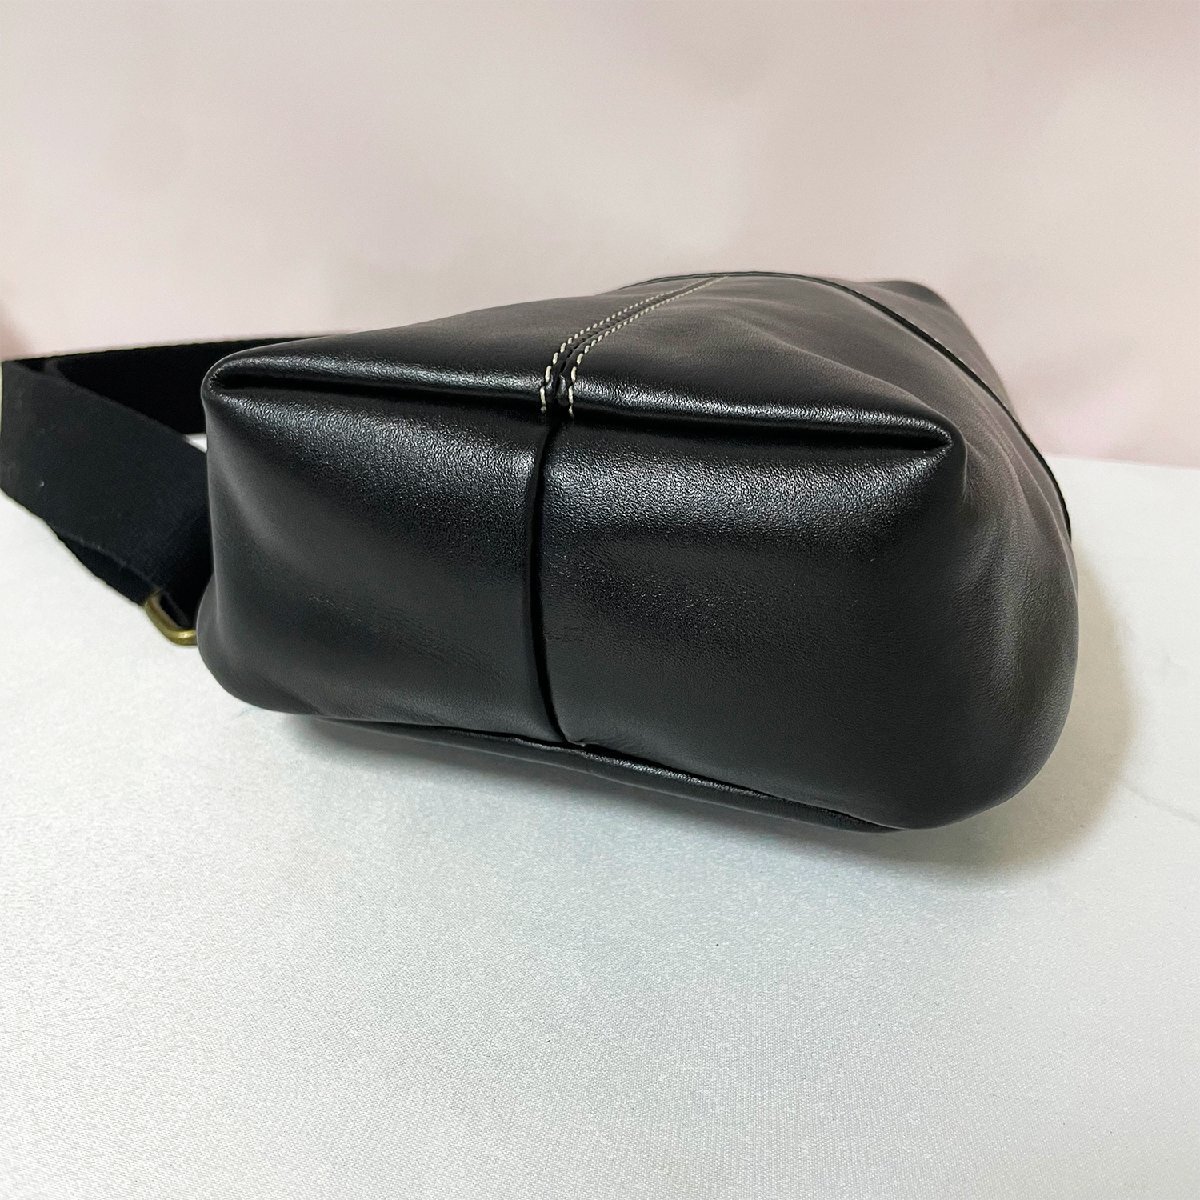  piece .* body bag regular price 12 ten thousand *Emmauela* Italy * milano departure * high class cow leather original leather water-repellent compact diagonal ..2WAY commuting going to school business men's 